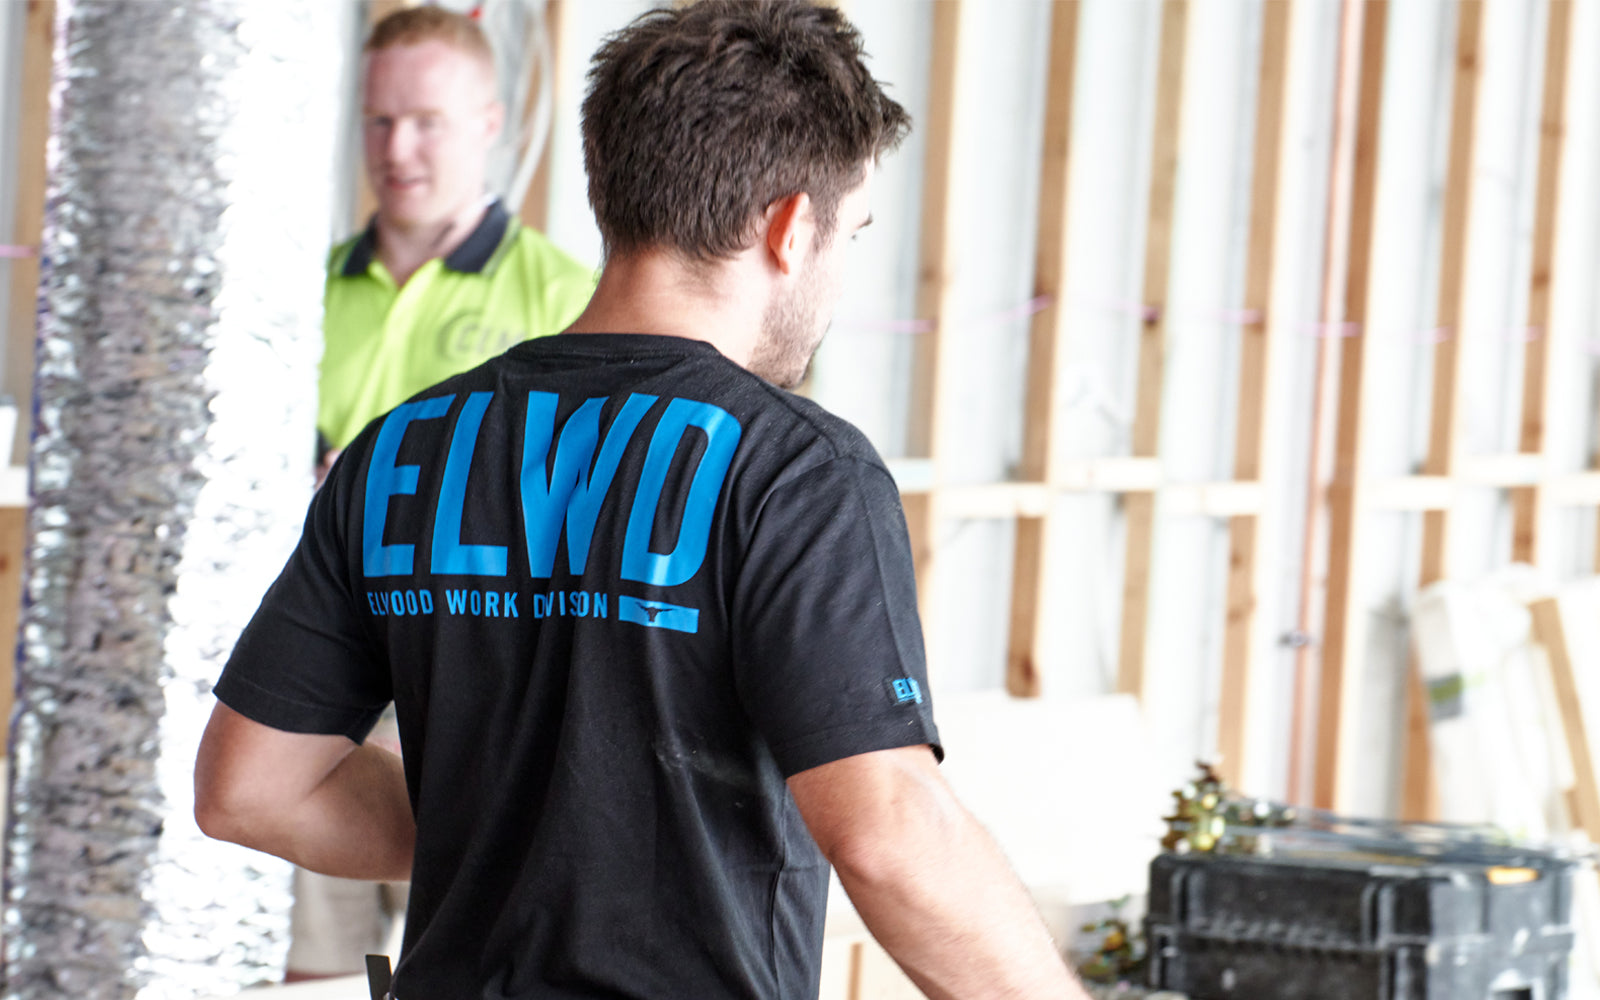 ELWD Workwear out performing the rest